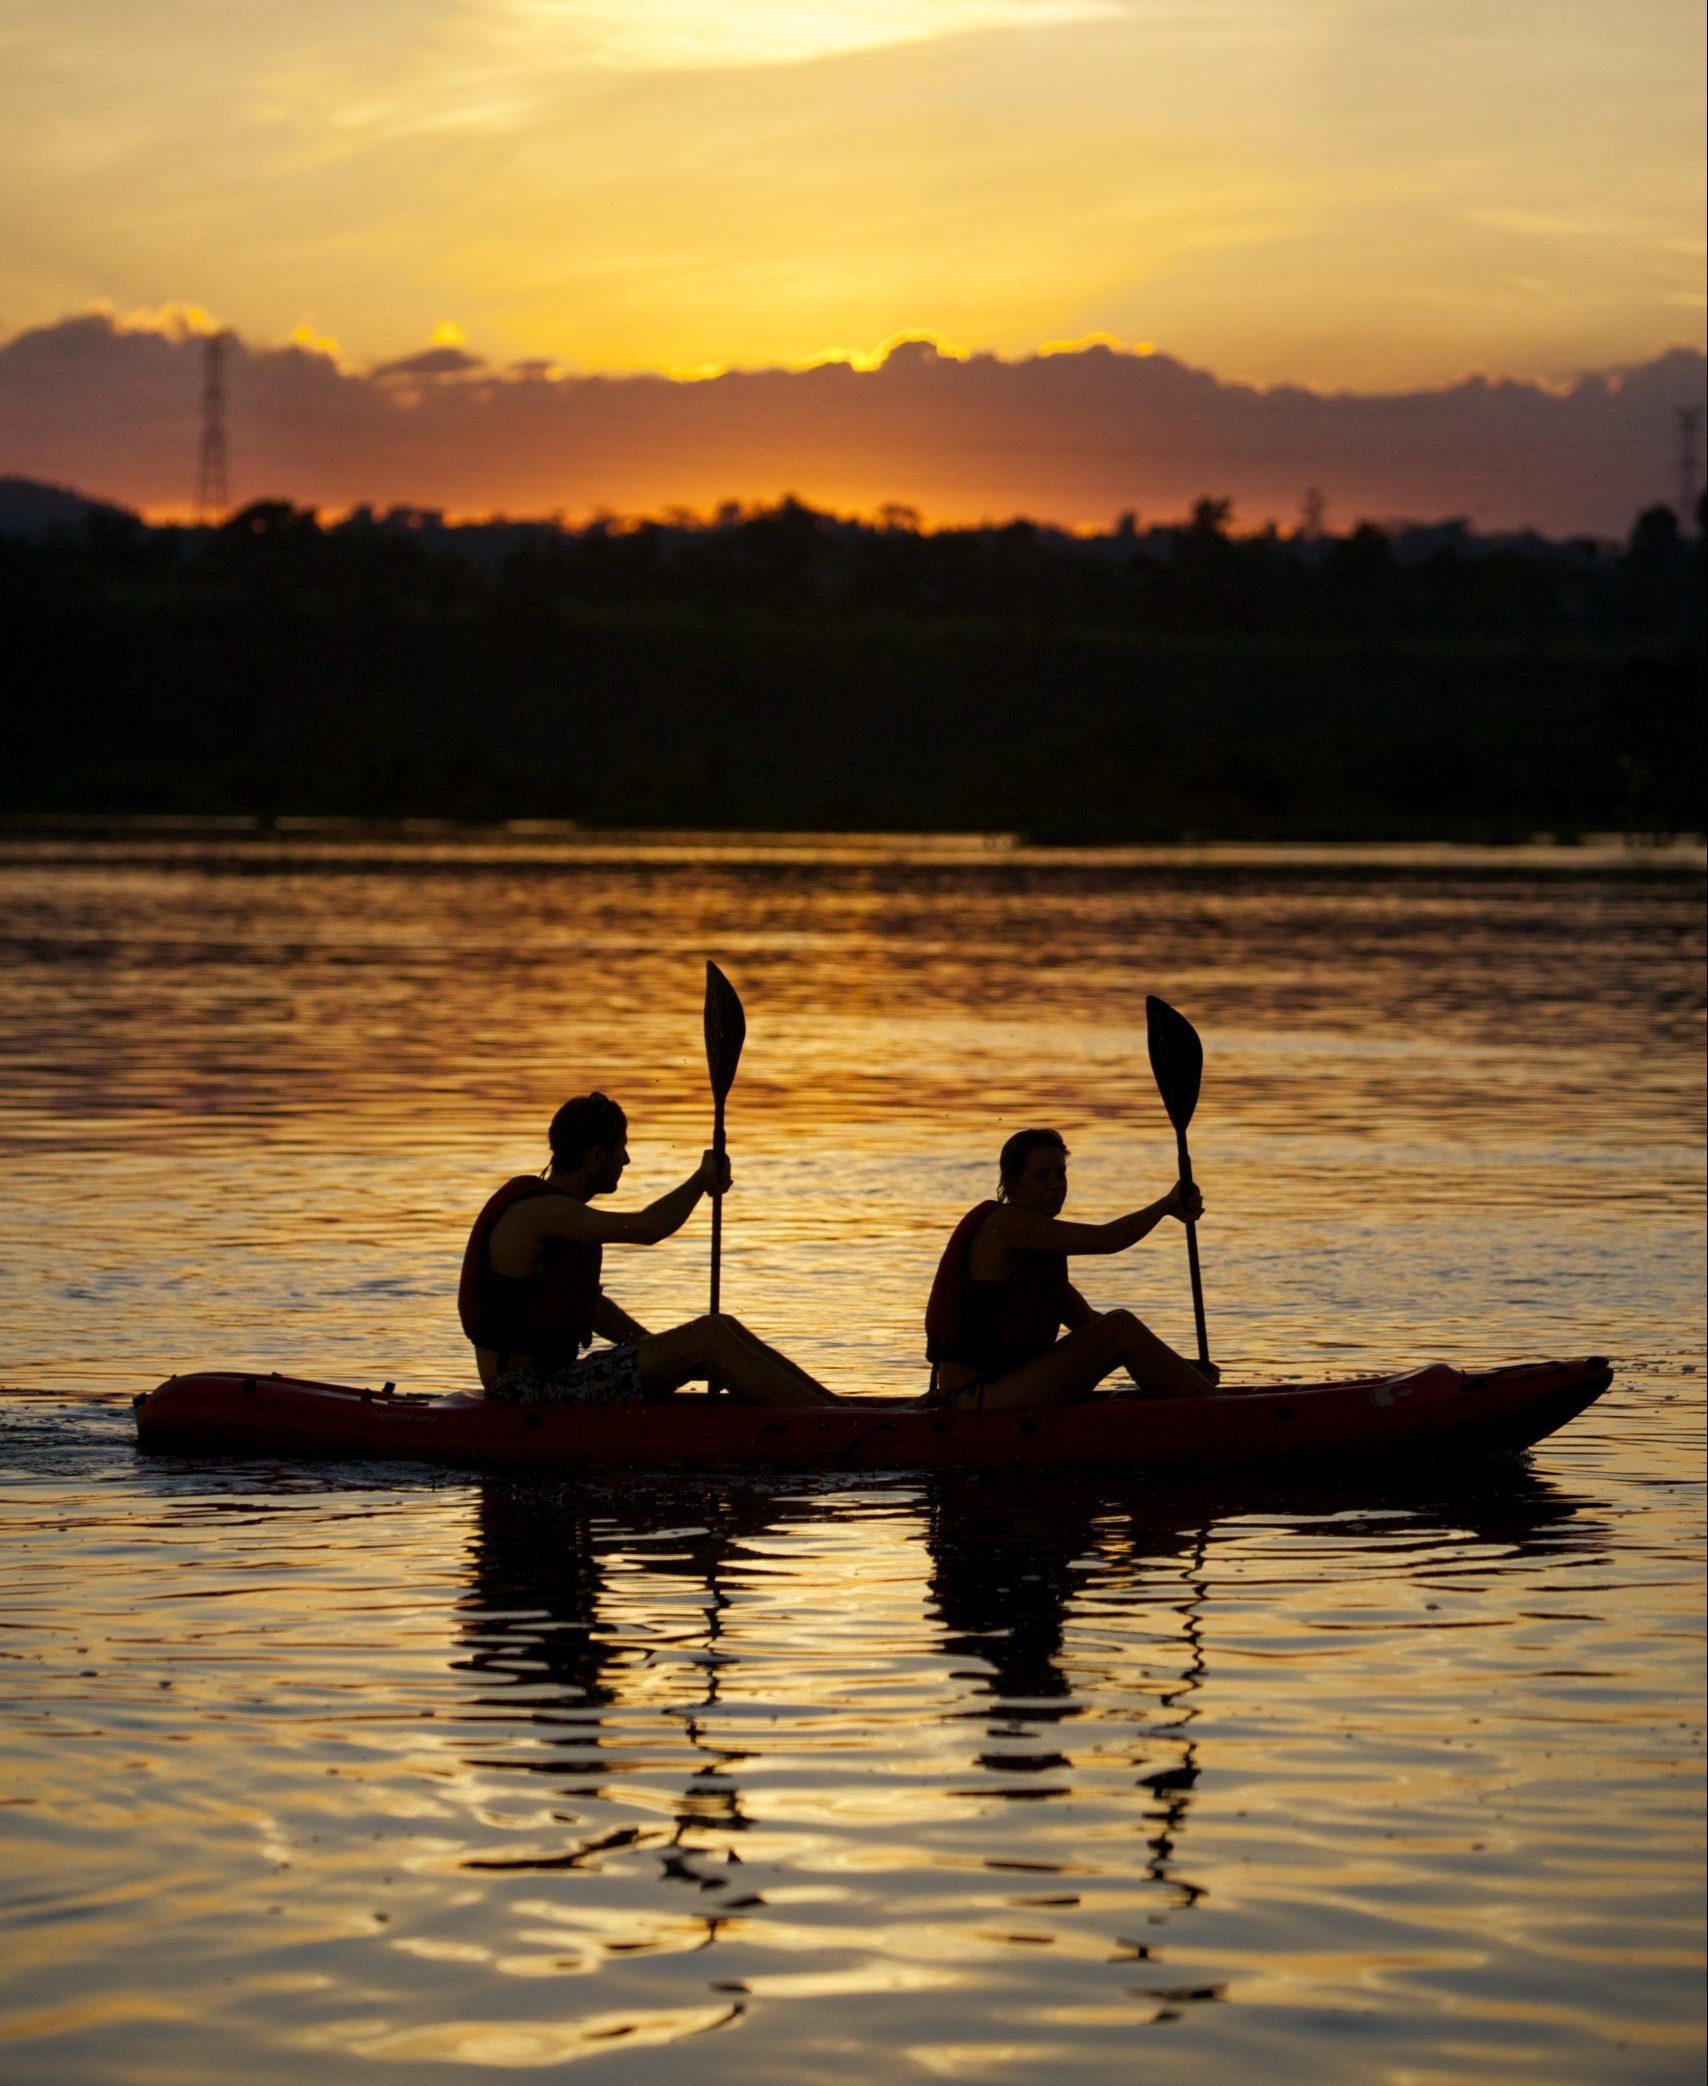 Kayaking: A double-seat kayak is used by two men for recreational purposes. 1710x2090 HD Wallpaper.